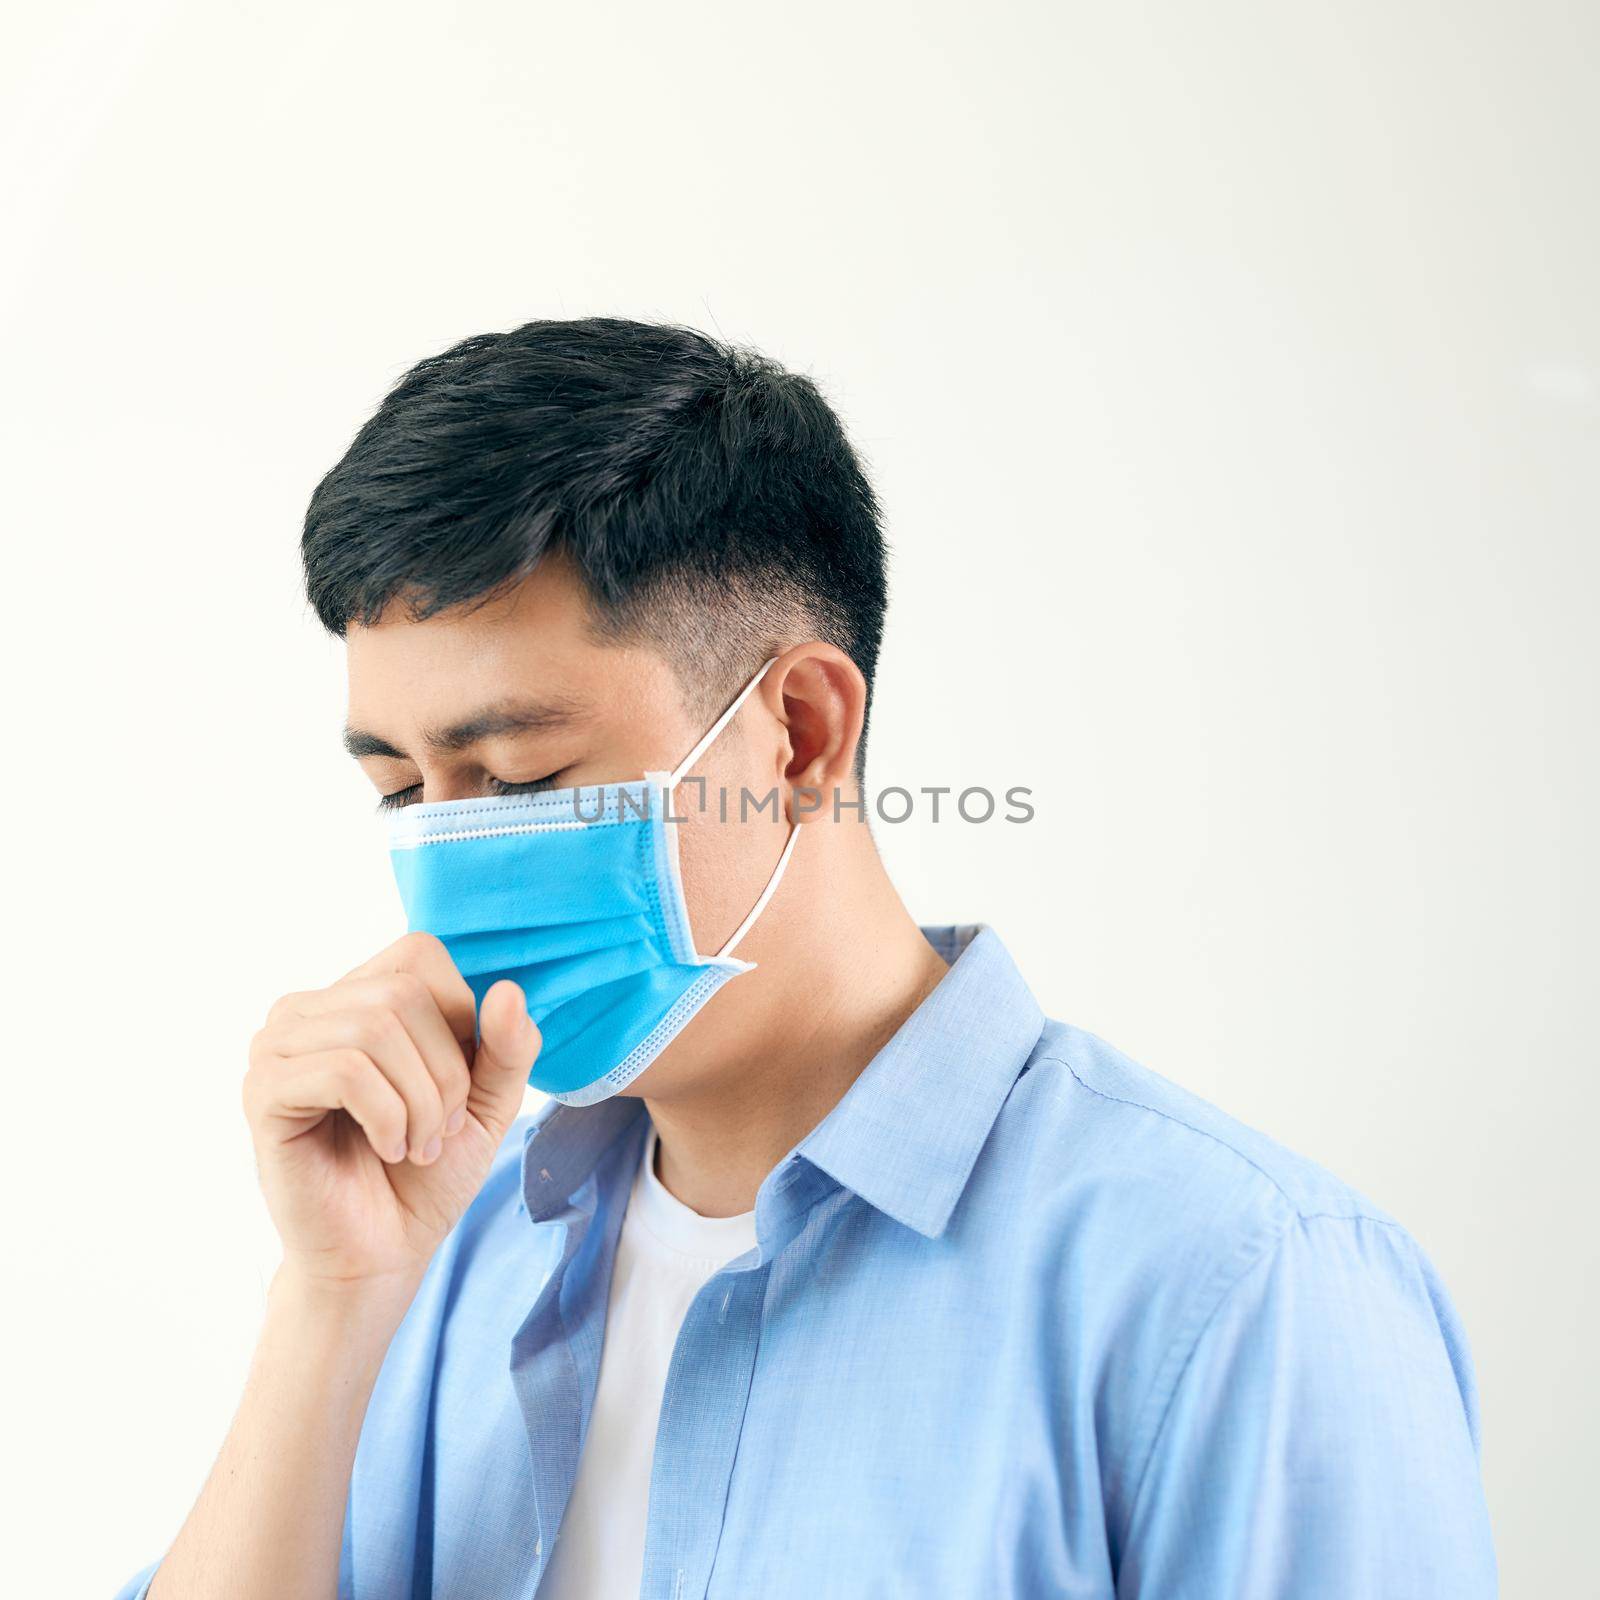 Asian man wearing surgical face mask coughing in subway station with crowded people walking pass. Wuhan coronavirus (COVID-19) outbreak prevention